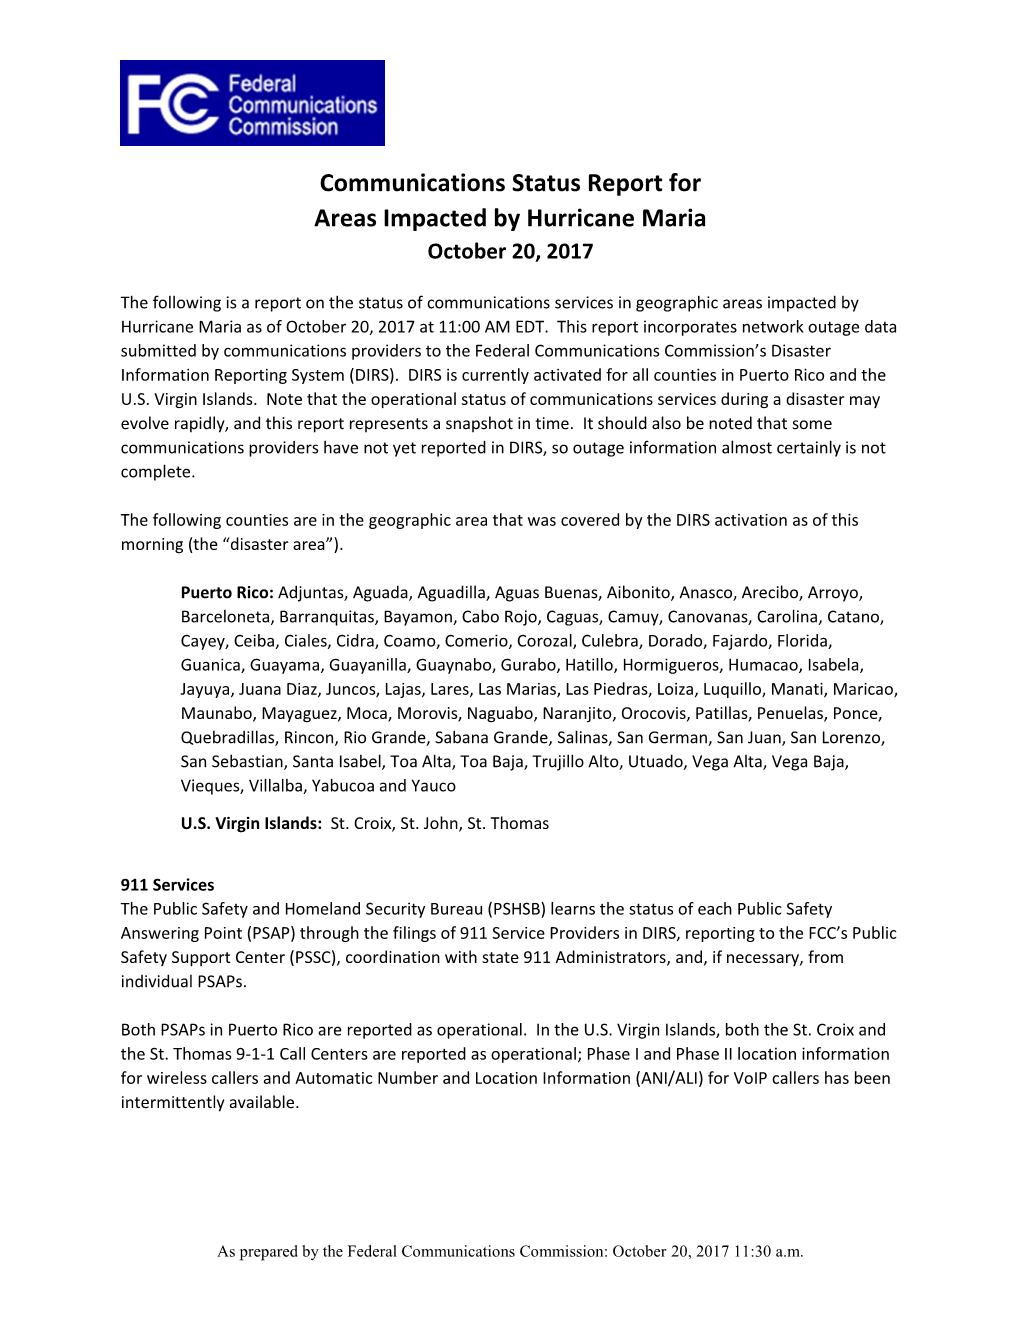 Communications Status Report for Areas Impacted by Hurricane Maria October 20, 2017